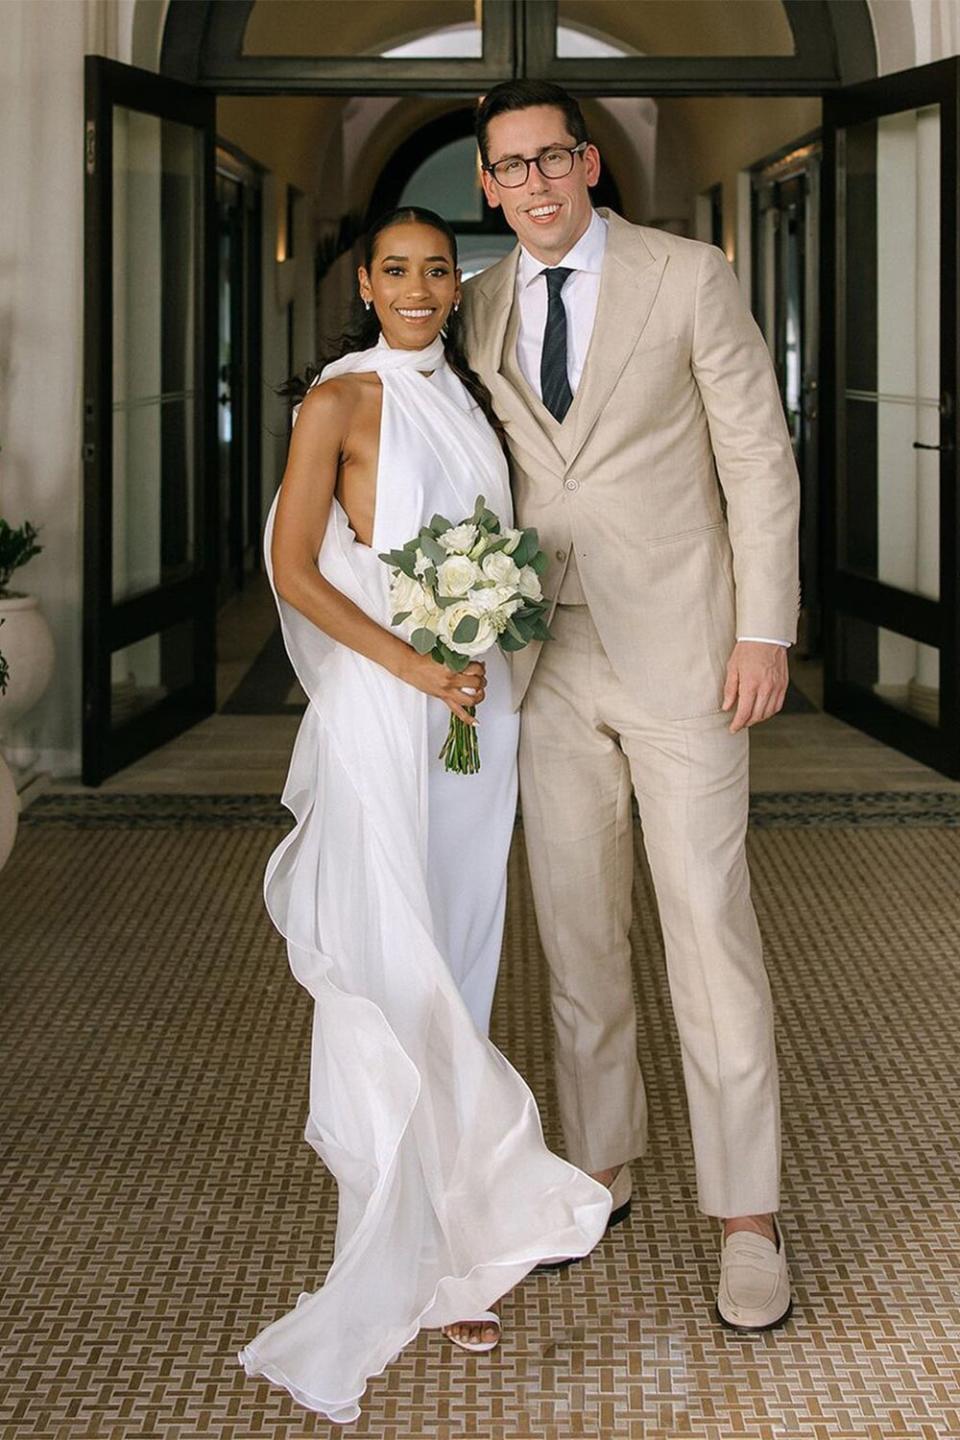 https://www.instagram.com/p/CmPCWS4JBSn/?hl=en   seinnefleming's profile picture seinne fleming Verified We are overjoyed to announce that we are officially married!  Last week, we exchanged vows on the most breathtaking beach in Anguilla, an unforgettable trip marking the start of our journey together as husband and wife.  While this ceremony was just the two of us, we were blessed to have our families present during an intimate wedding in Los Angeles last month. We look forward to sharing moments from that special day very soon.  We are overwhelmed with gratitude for the love and support of our friends and loved ones as we embark on this new chapter in our relationship!  ������ Seinne + Doug Edited · 6h